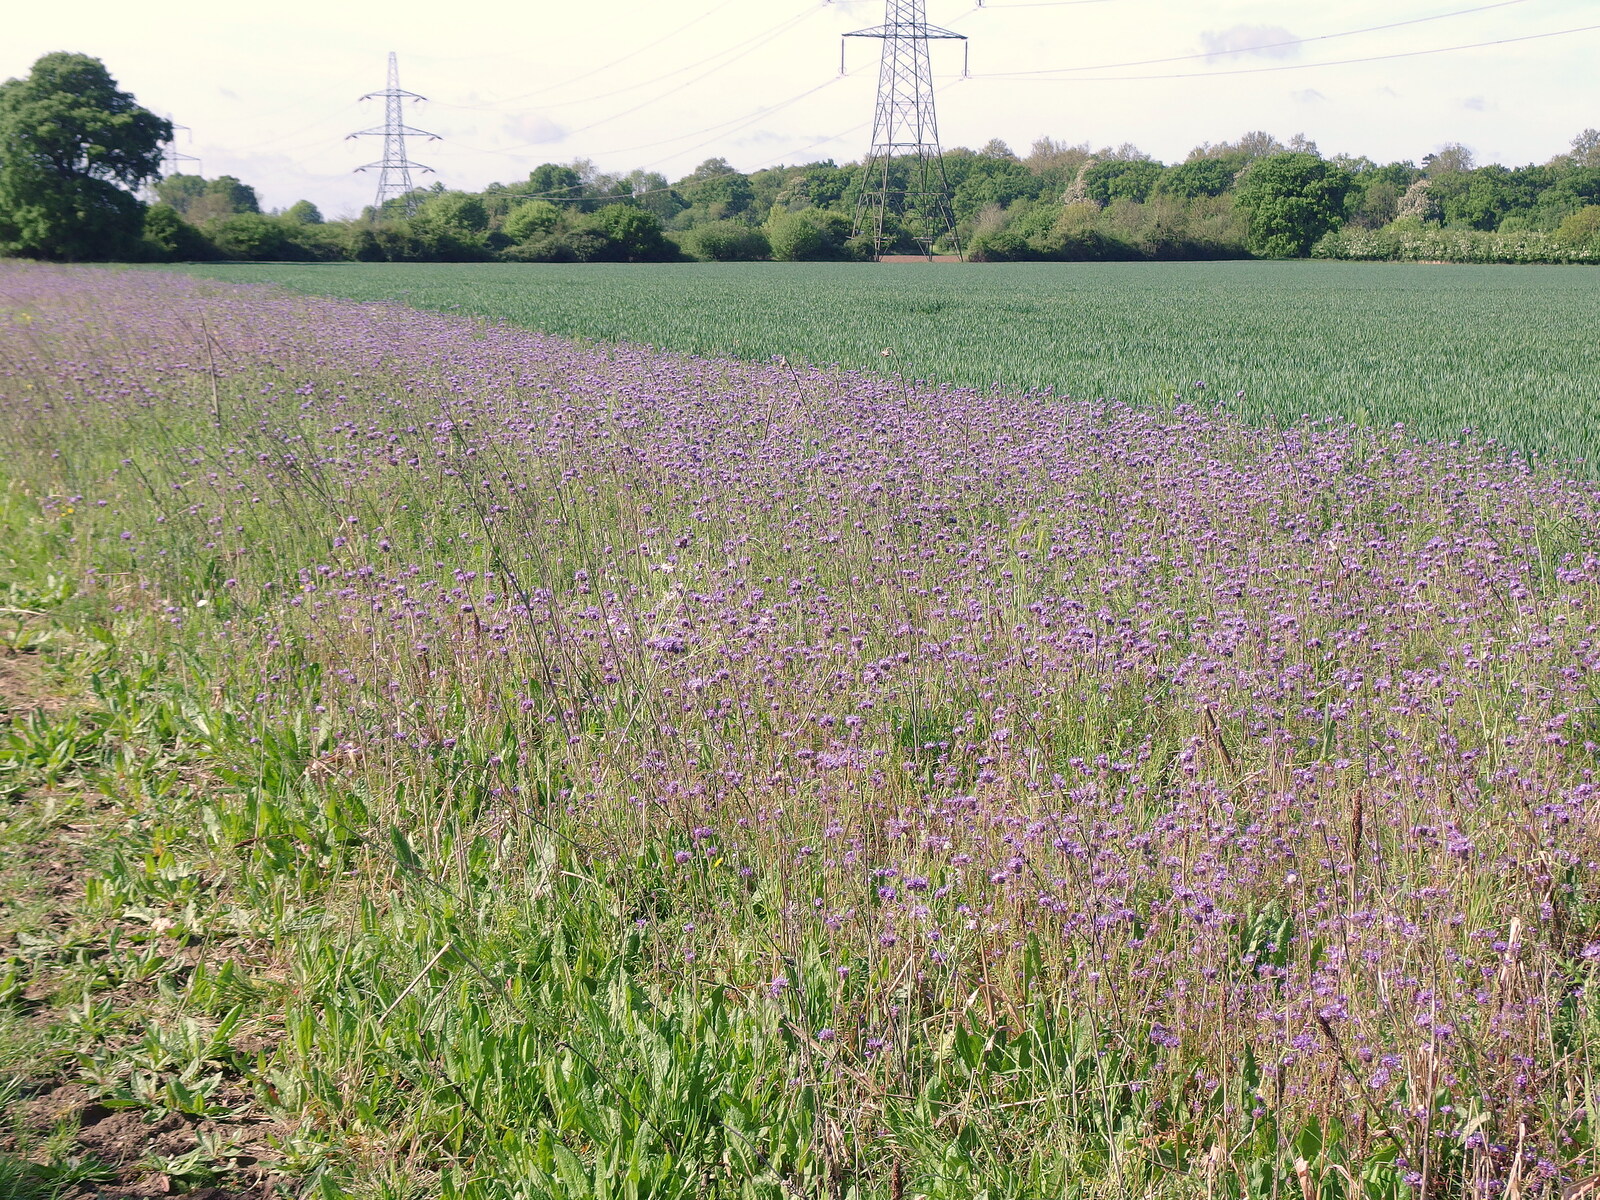 Purple flowers in a field margin at Thornham Parva from The BSCC at Burston and The Legend of Swallow Aquatics, East Harling, Norfolk - 15th May 2022